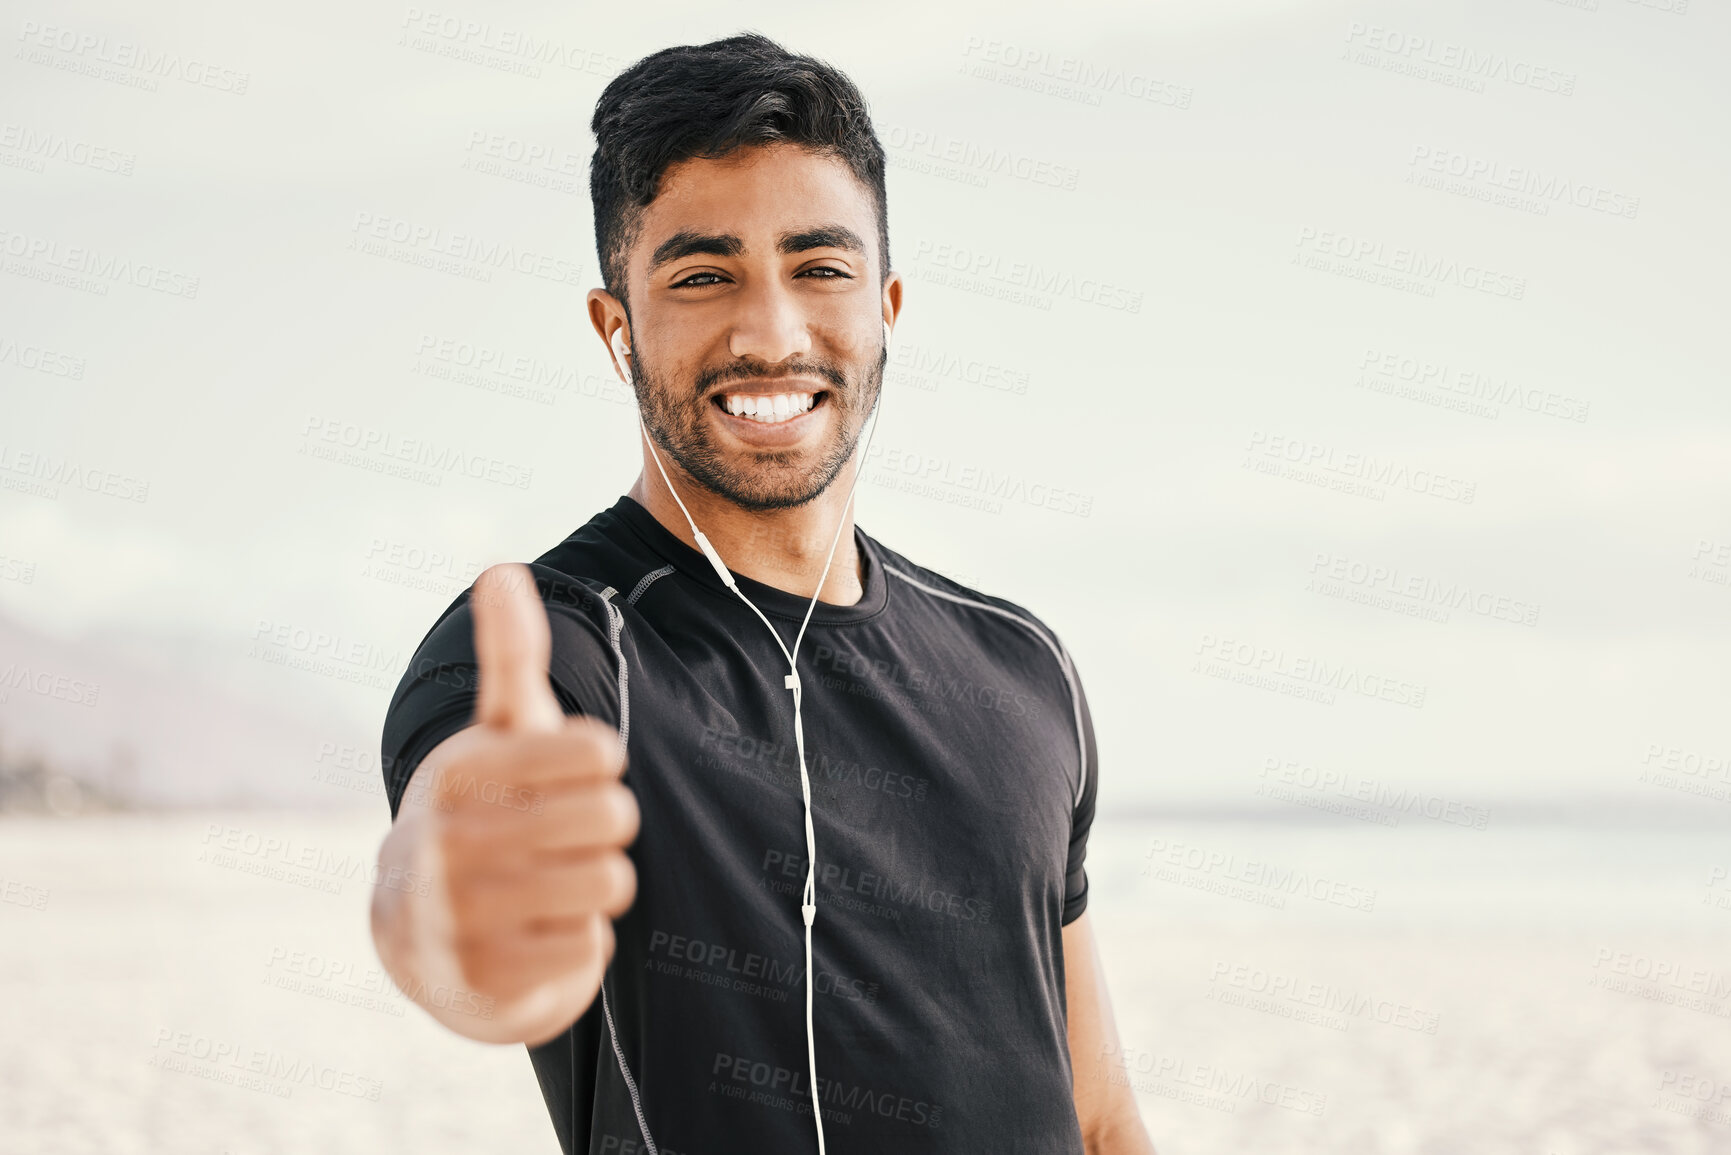 Buy stock photo Shot of a sporty young man wearing earphones and showing thumbs up while standing outside